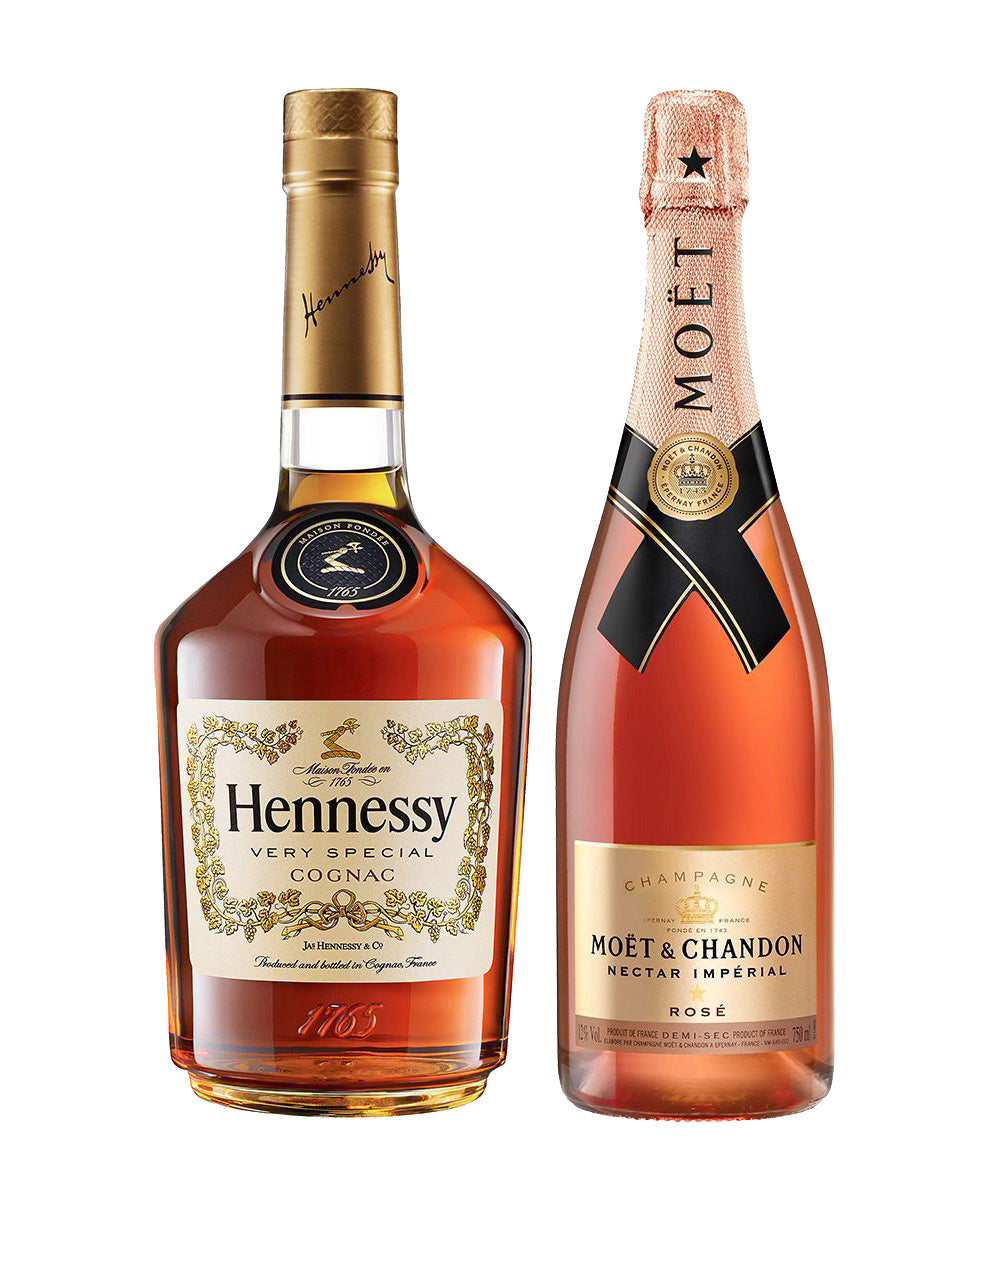 Moet Hennessy, Brands of the World™